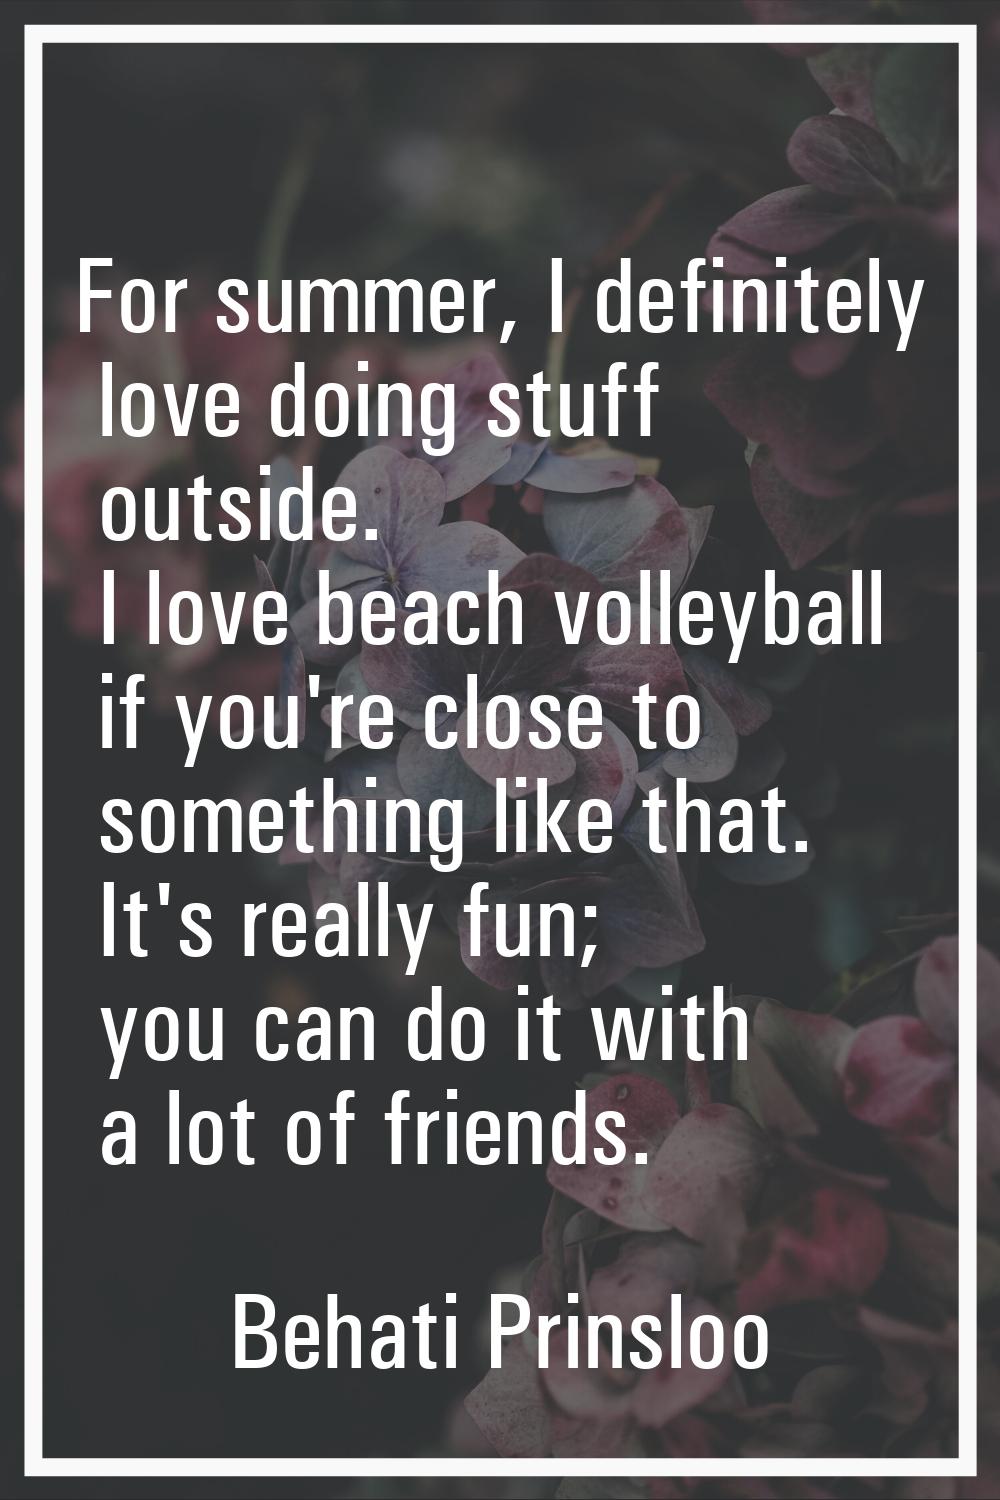 For summer, I definitely love doing stuff outside. I love beach volleyball if you're close to somet